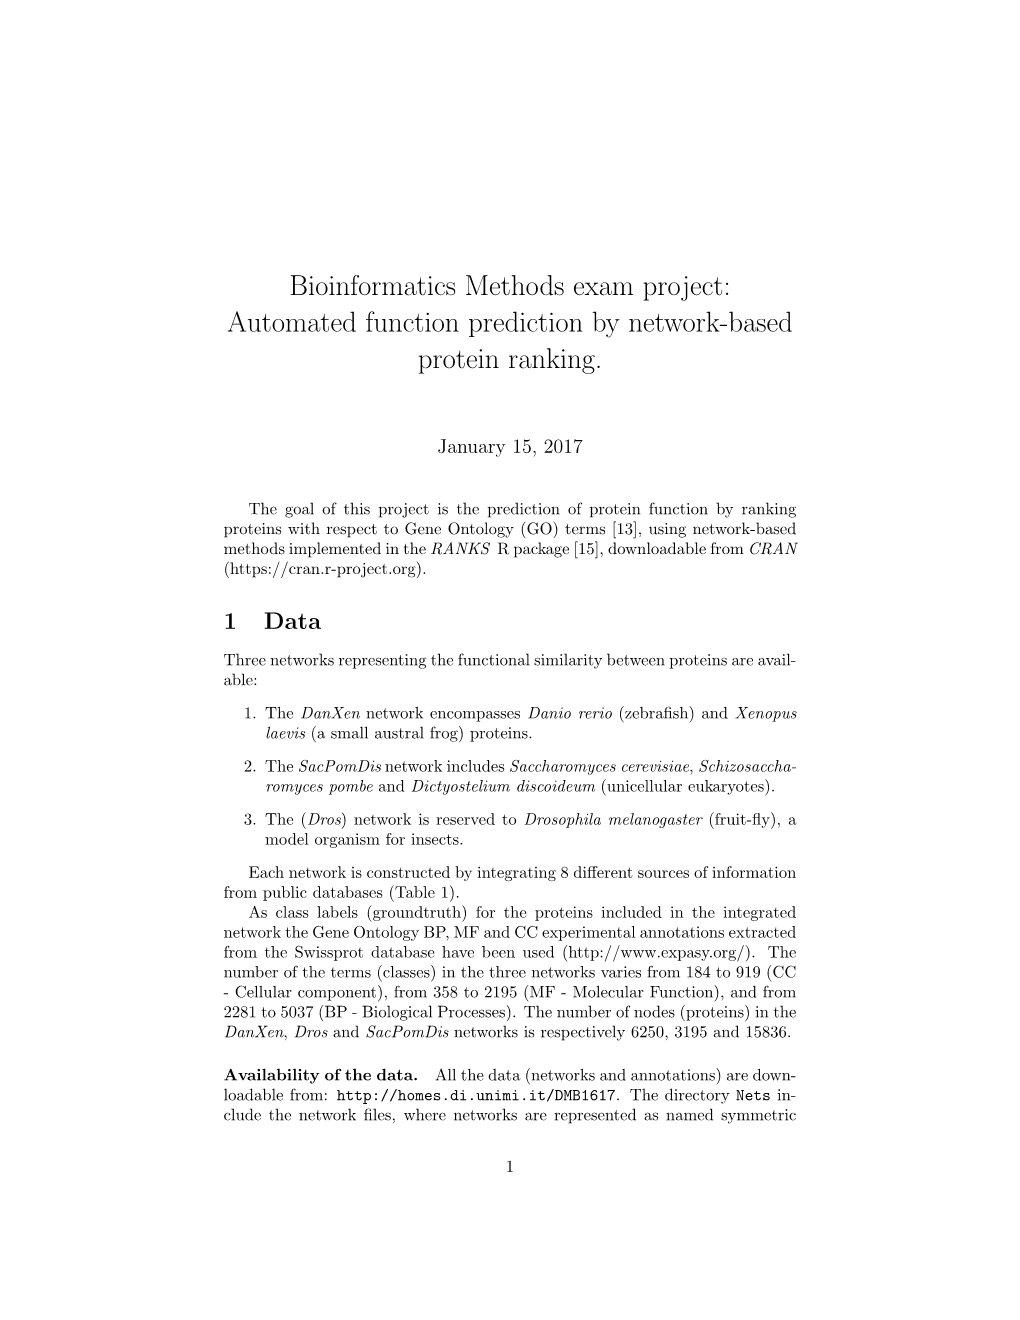 Bioinformatics Methods Exam Project: Automated Function Prediction by Network-Based Protein Ranking